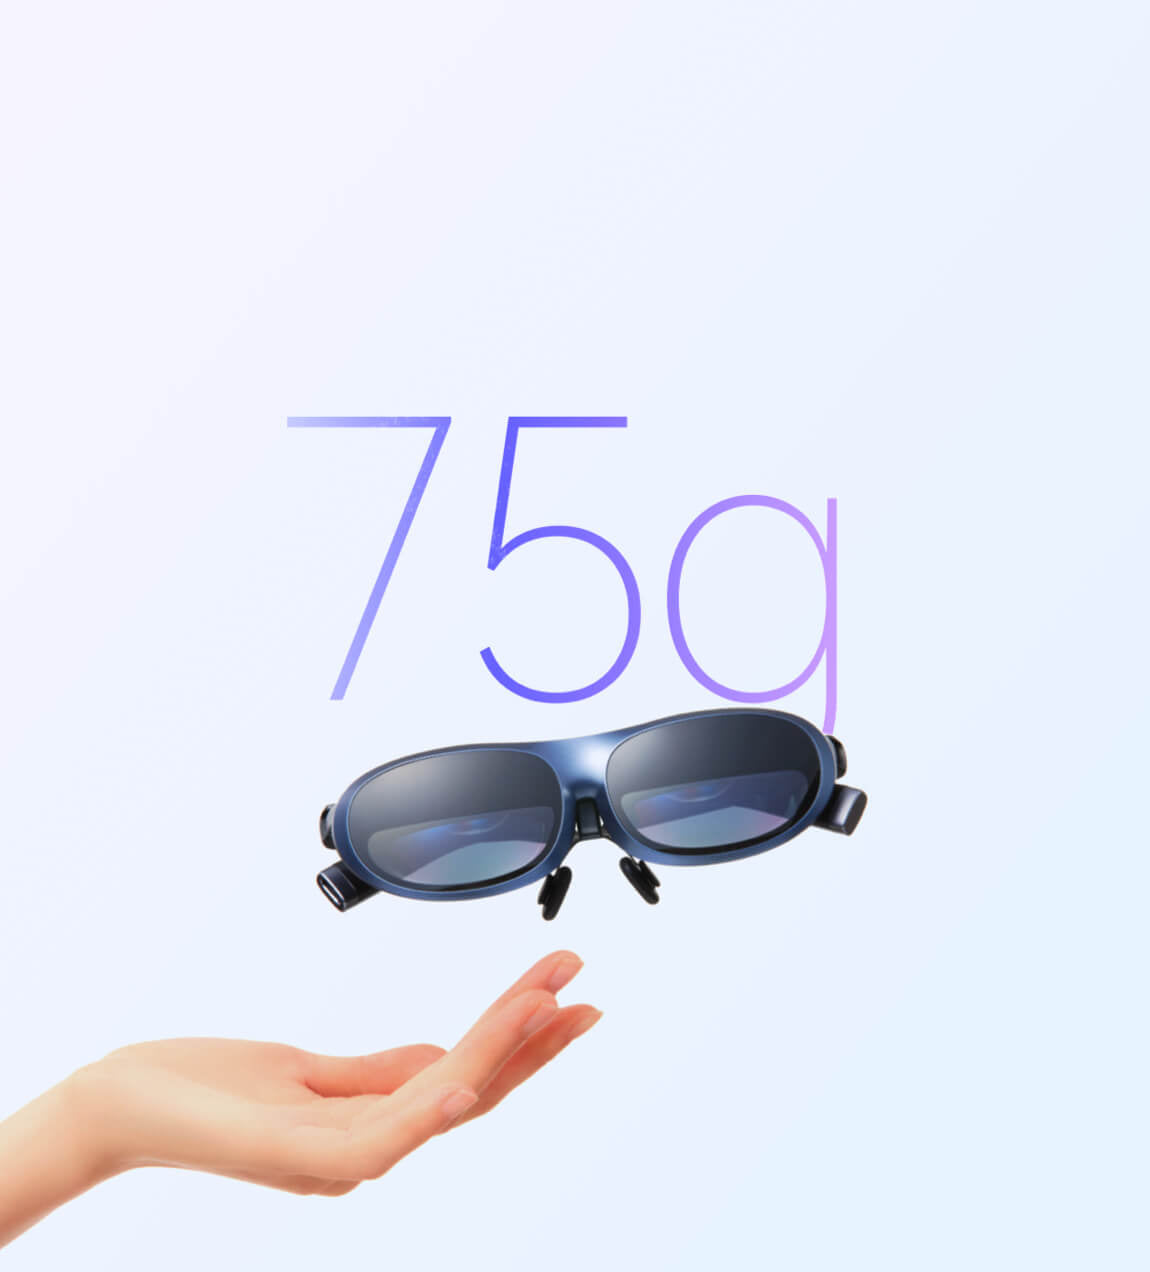 Rokid MAX intelligent glasses with 75g in Weight